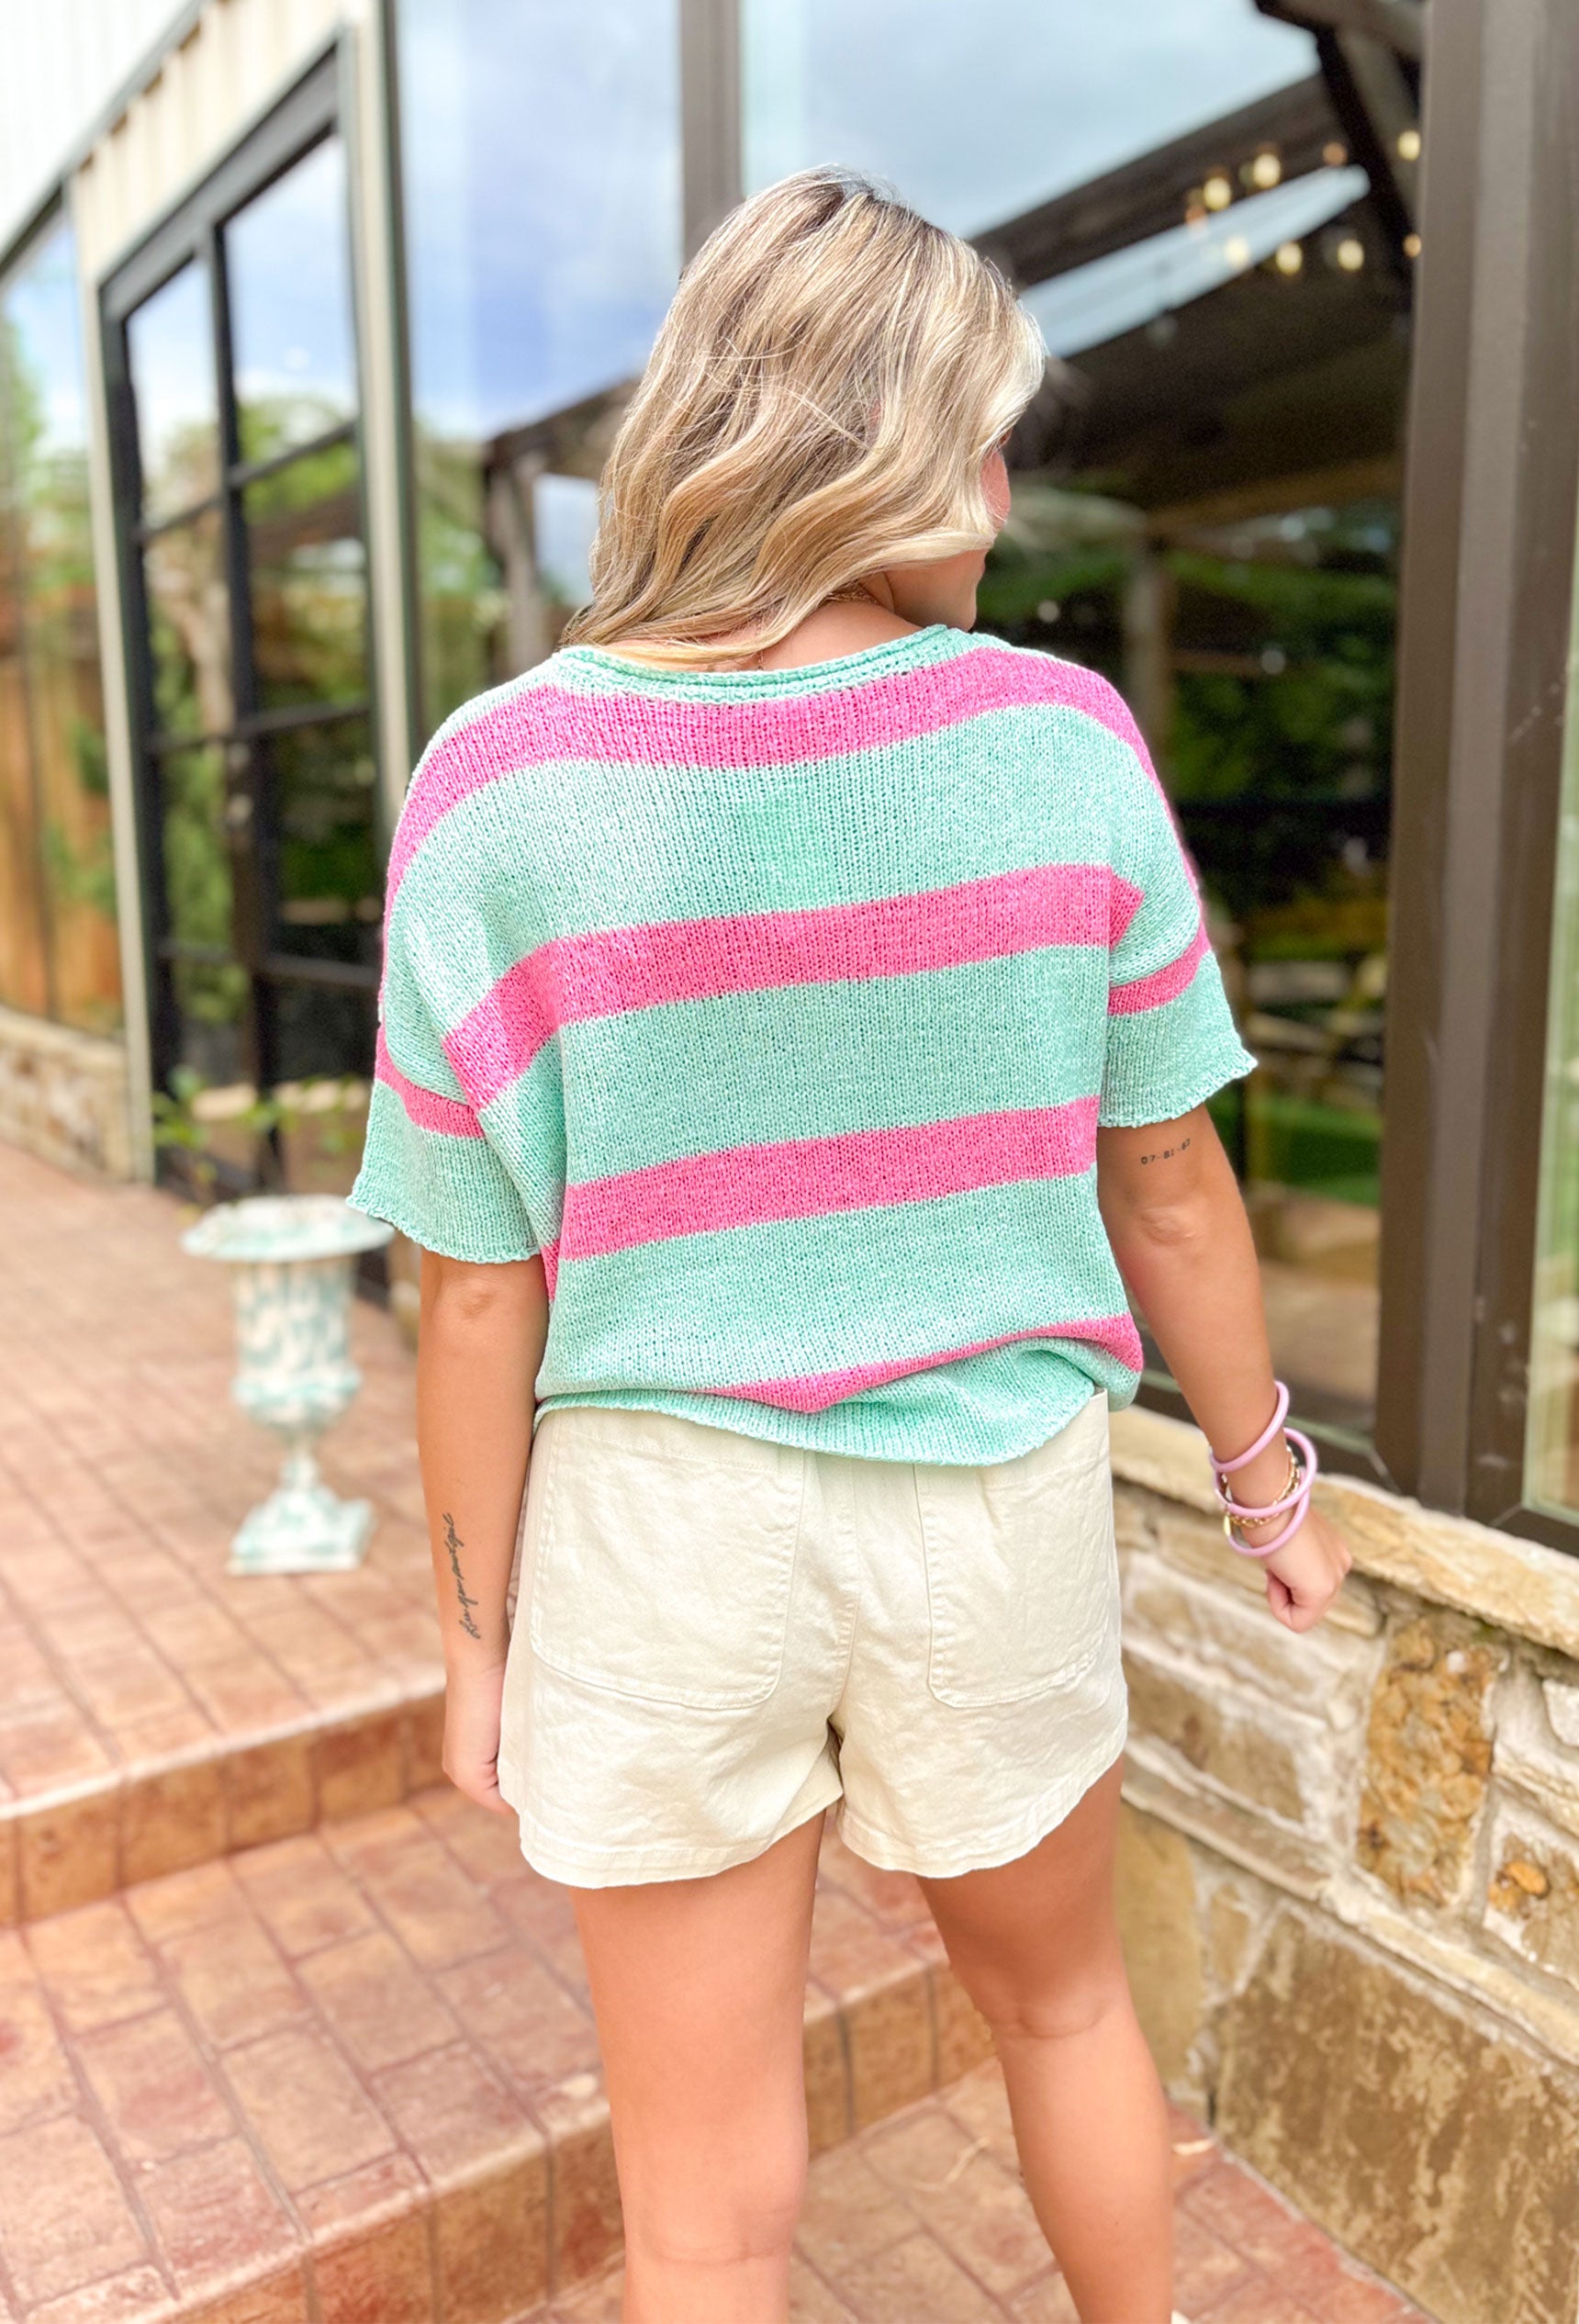 High Hopes Striped Sweater in Mint, short sleeve knit top in seafoam and bubble gum pink